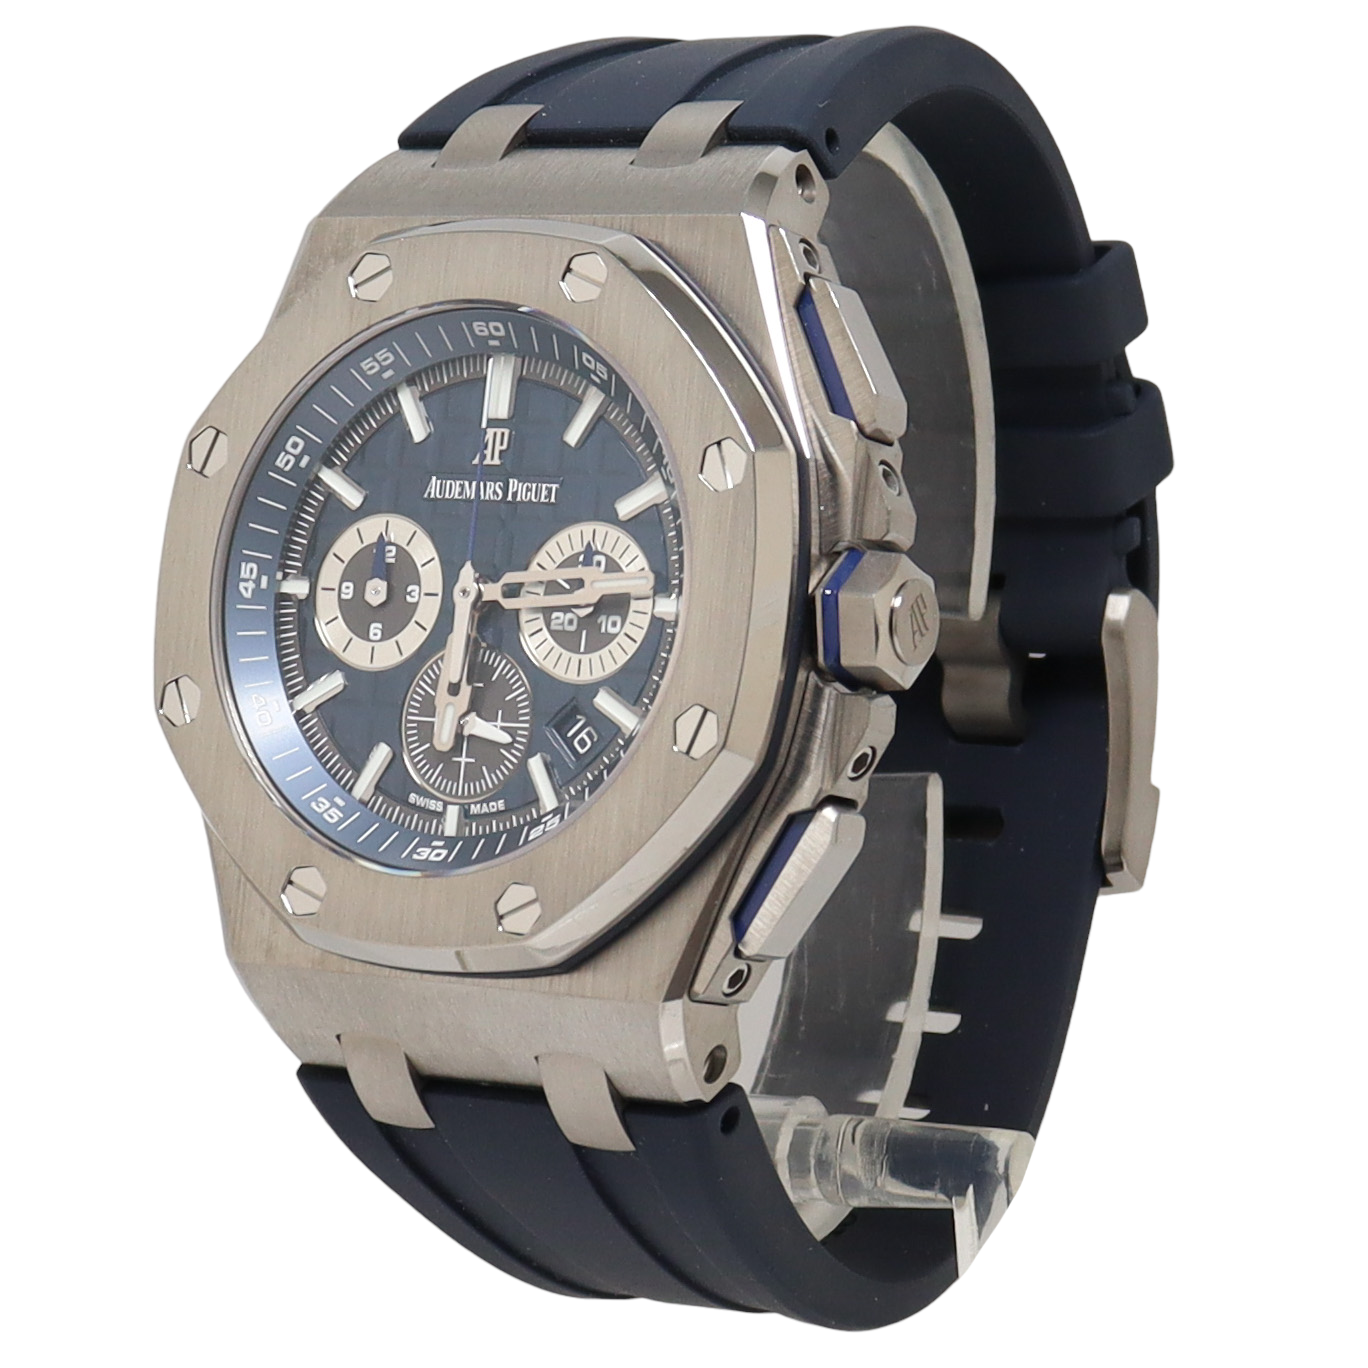 Audemars Piguet Royal Oak Offshore Chronograph Stainless Steel 42mm Blue Chronograph Dial Watch Reference# 26480TI.OO.A027CA.01 - Happy Jewelers Fine Jewelry Lifetime Warranty